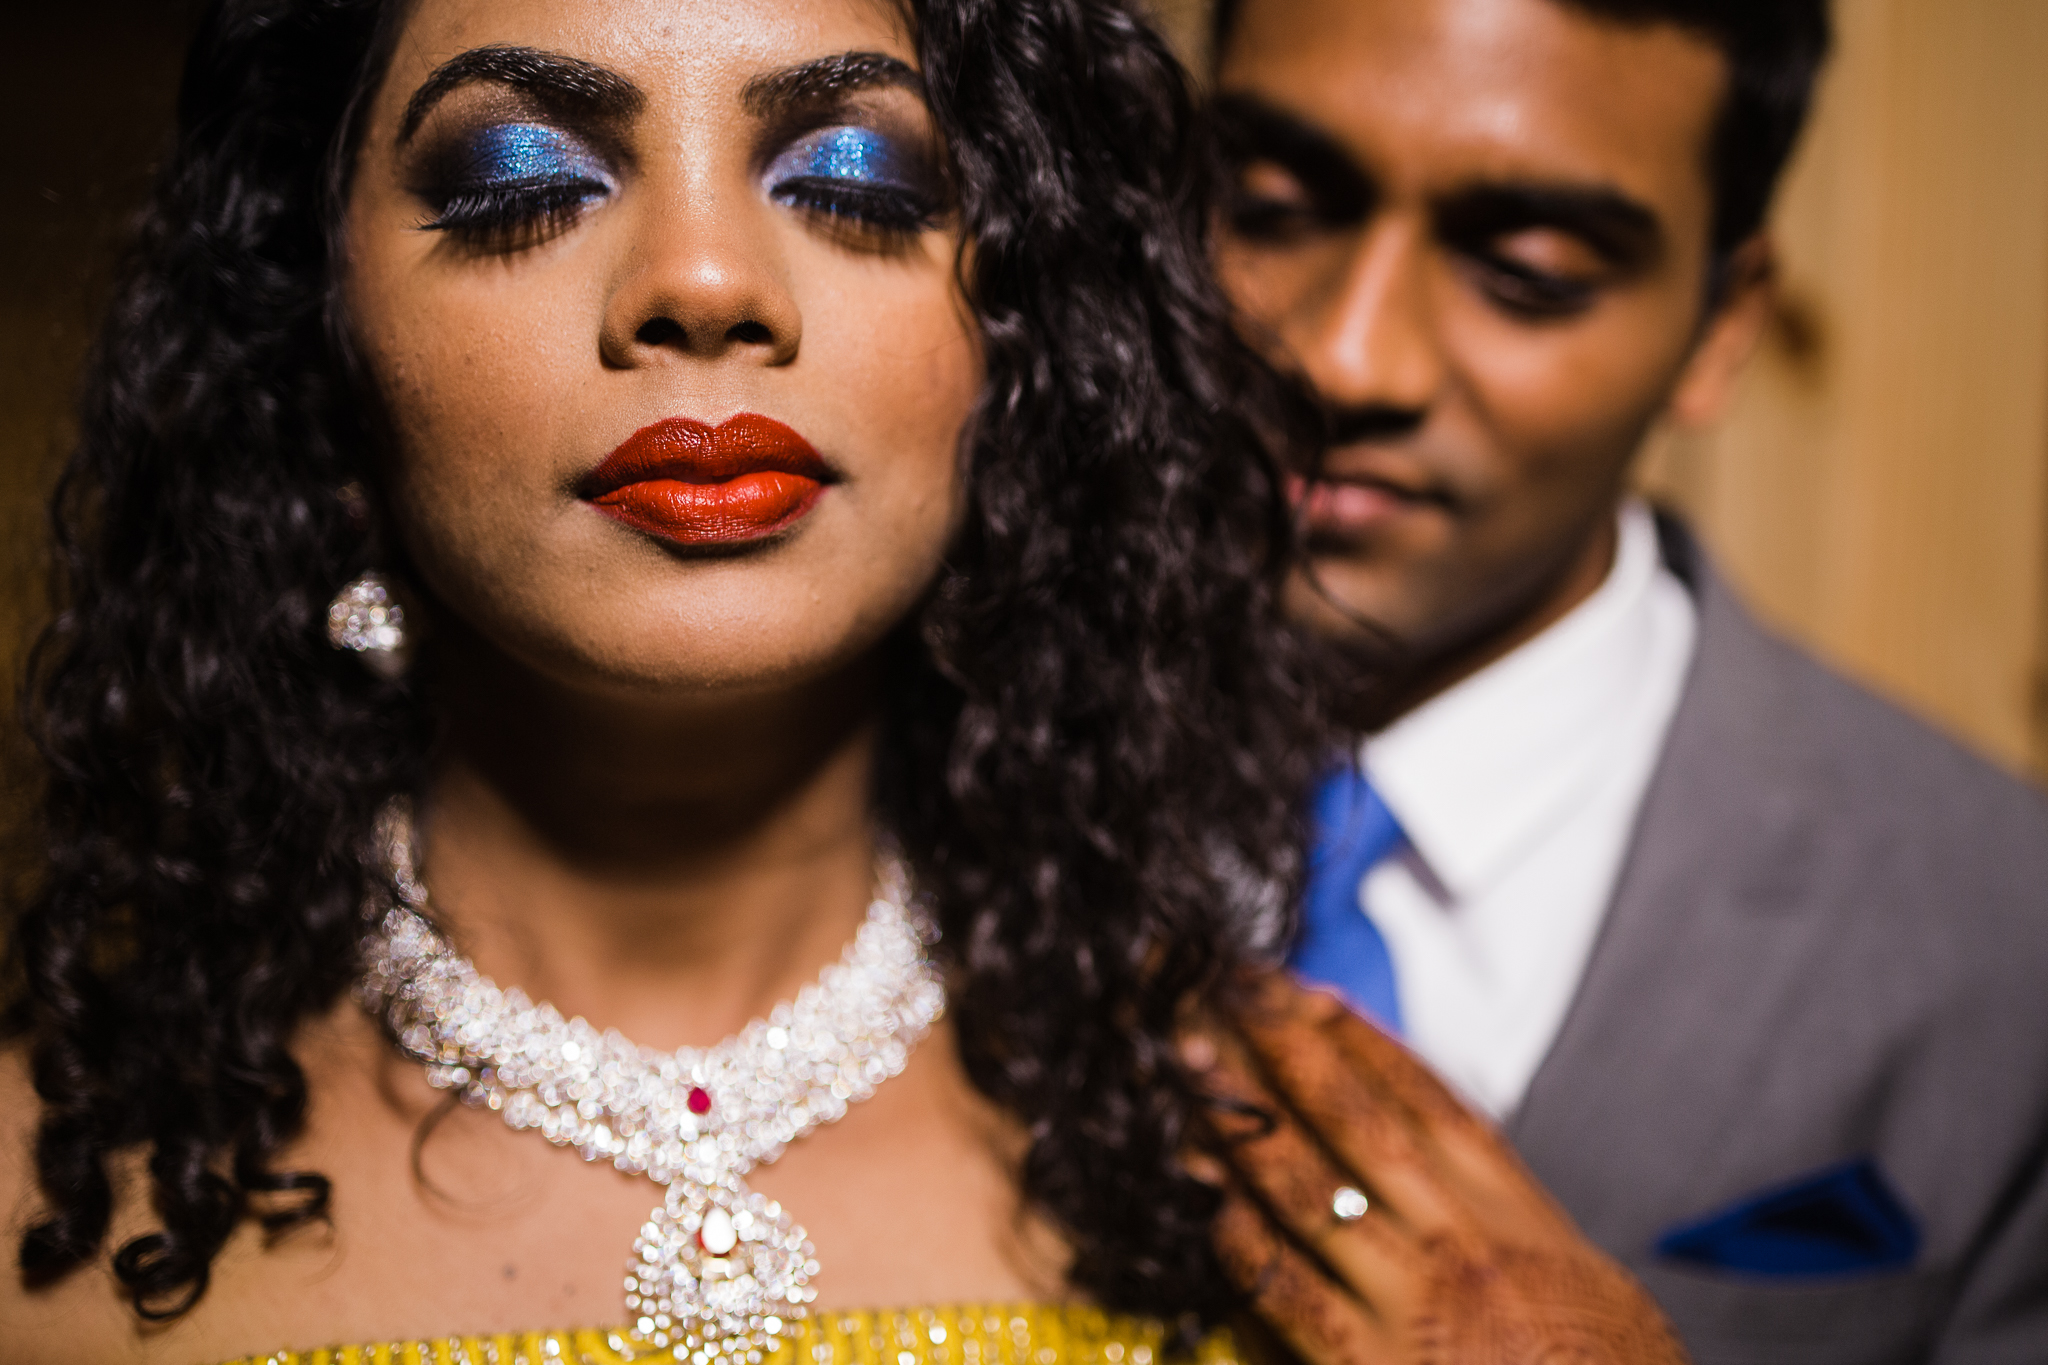 Keerthi and Kishore - Indian Wedding - elizalde photography - Dallas Photographer - South Asian Wedding Photographer - The SPRINGS Event Venue (184 of 226).jpg